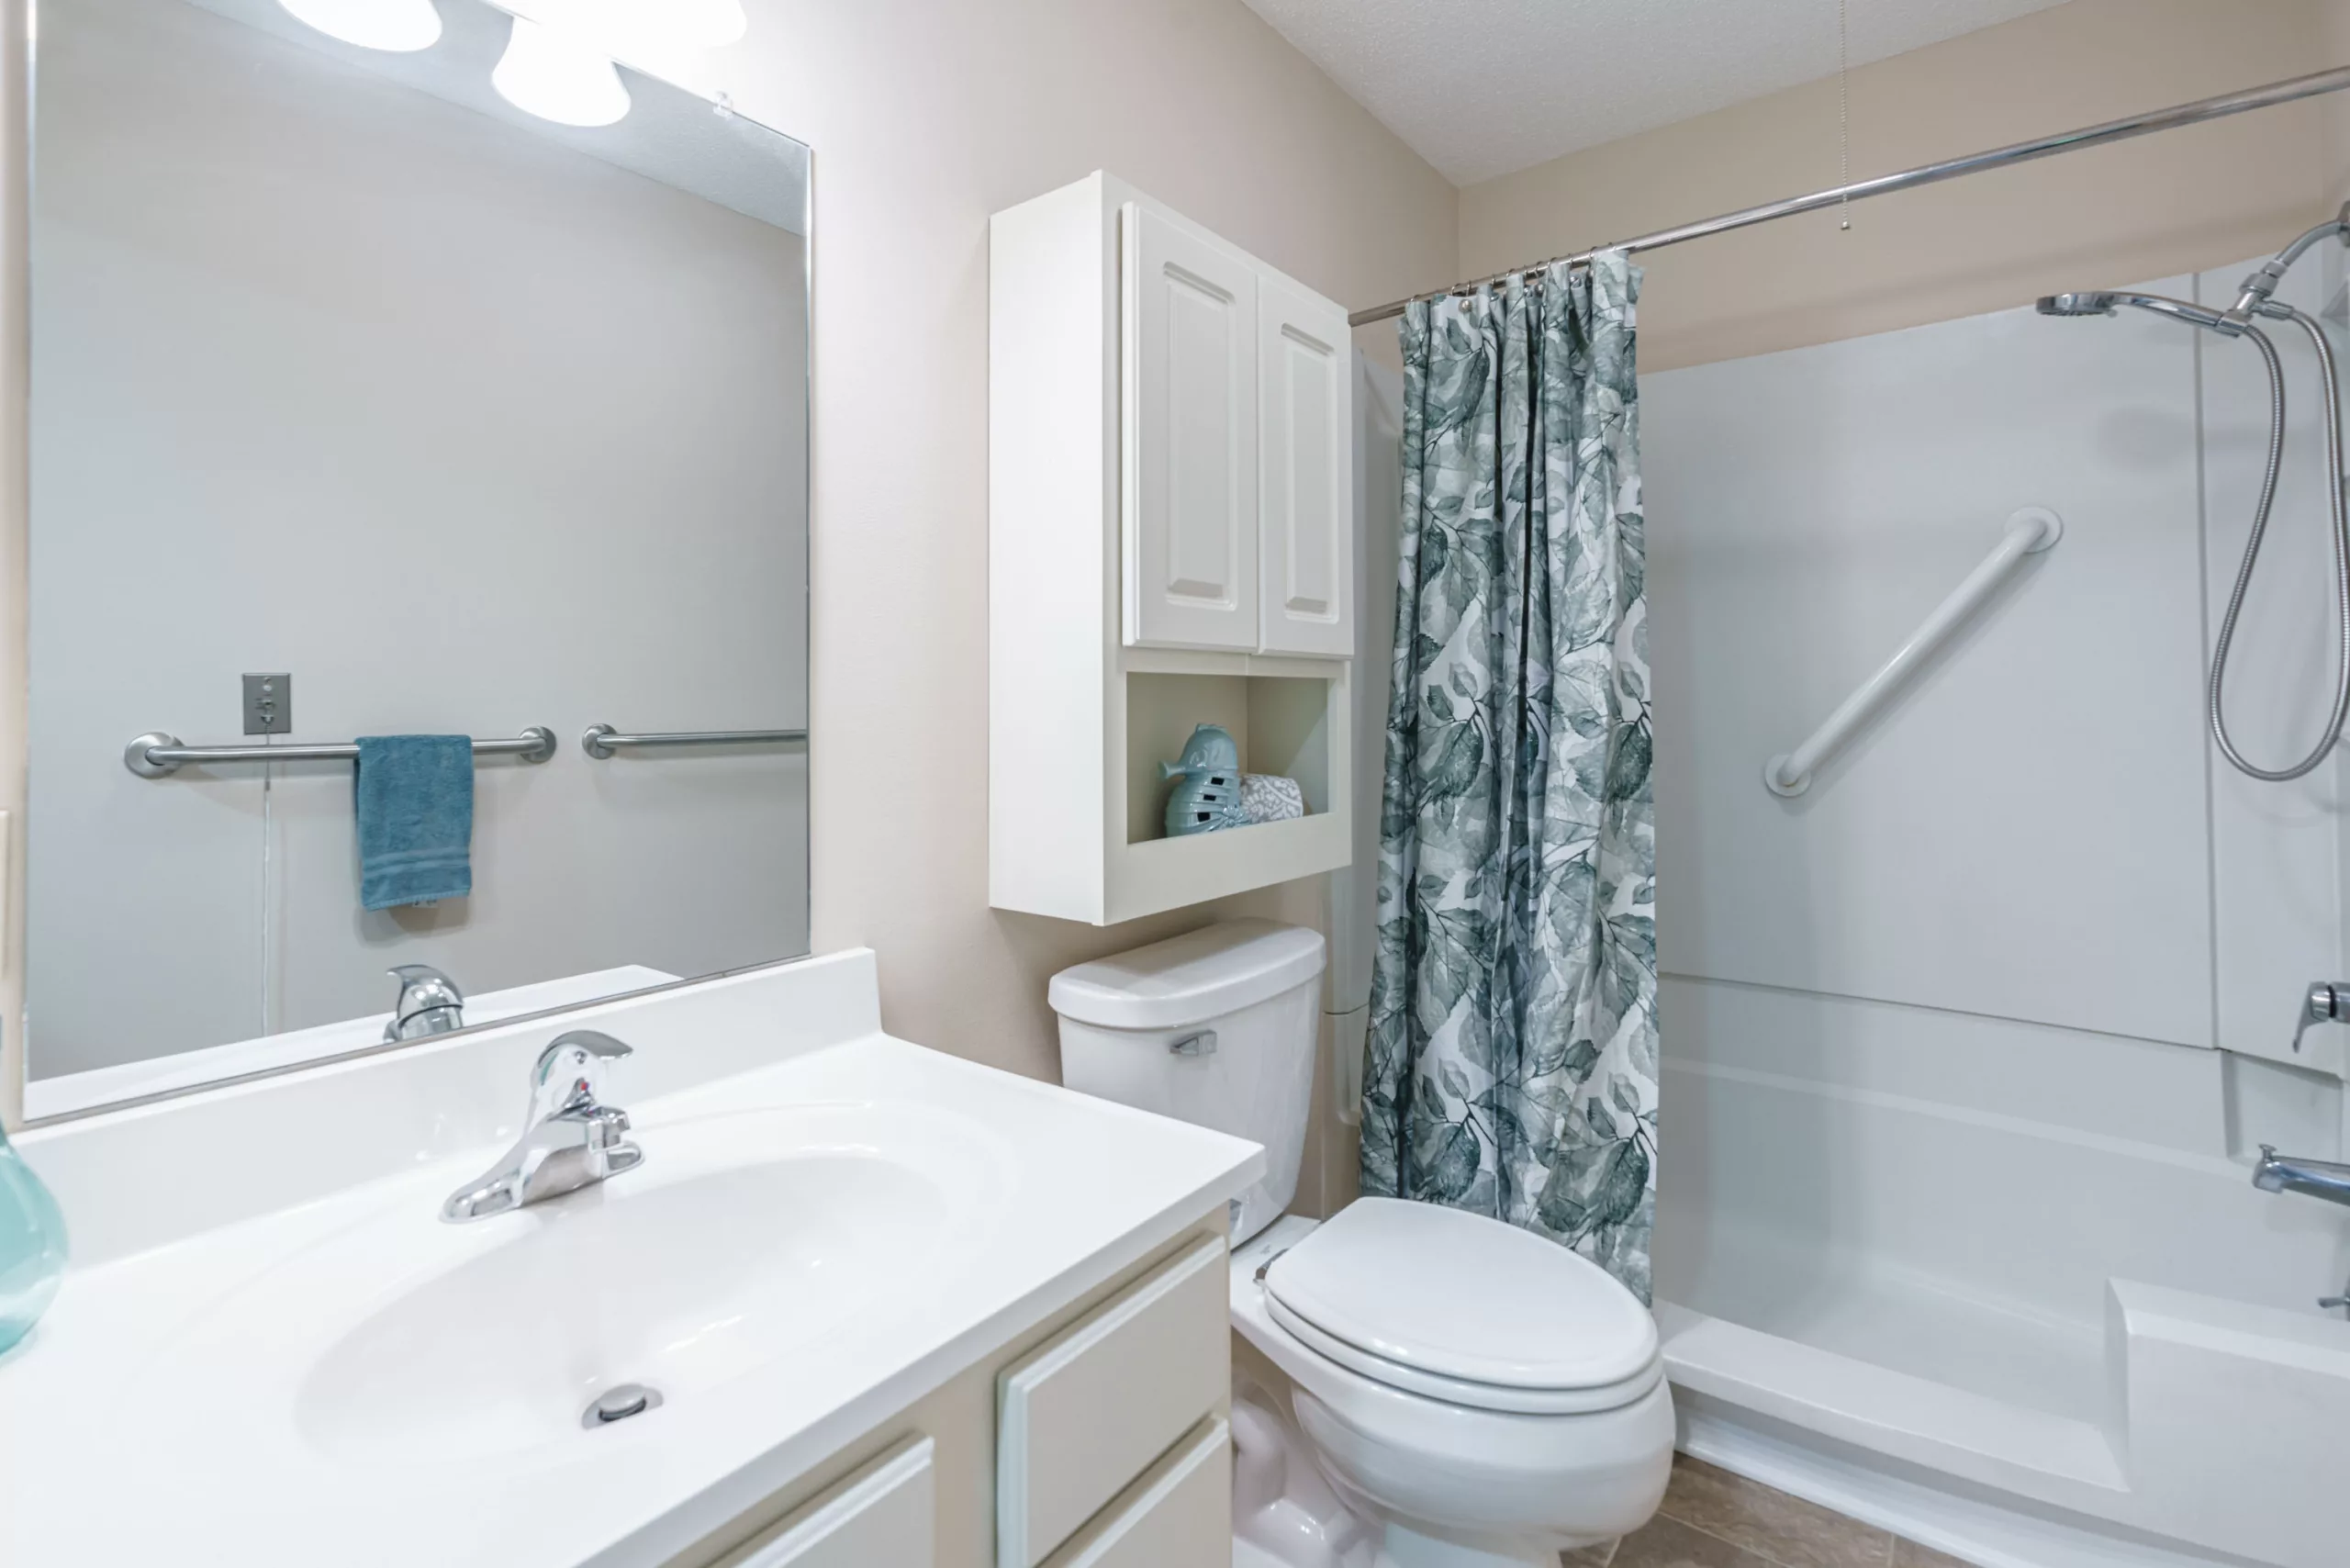 One of the Terrace bathroom options for independent living in Columbia, Missouri.